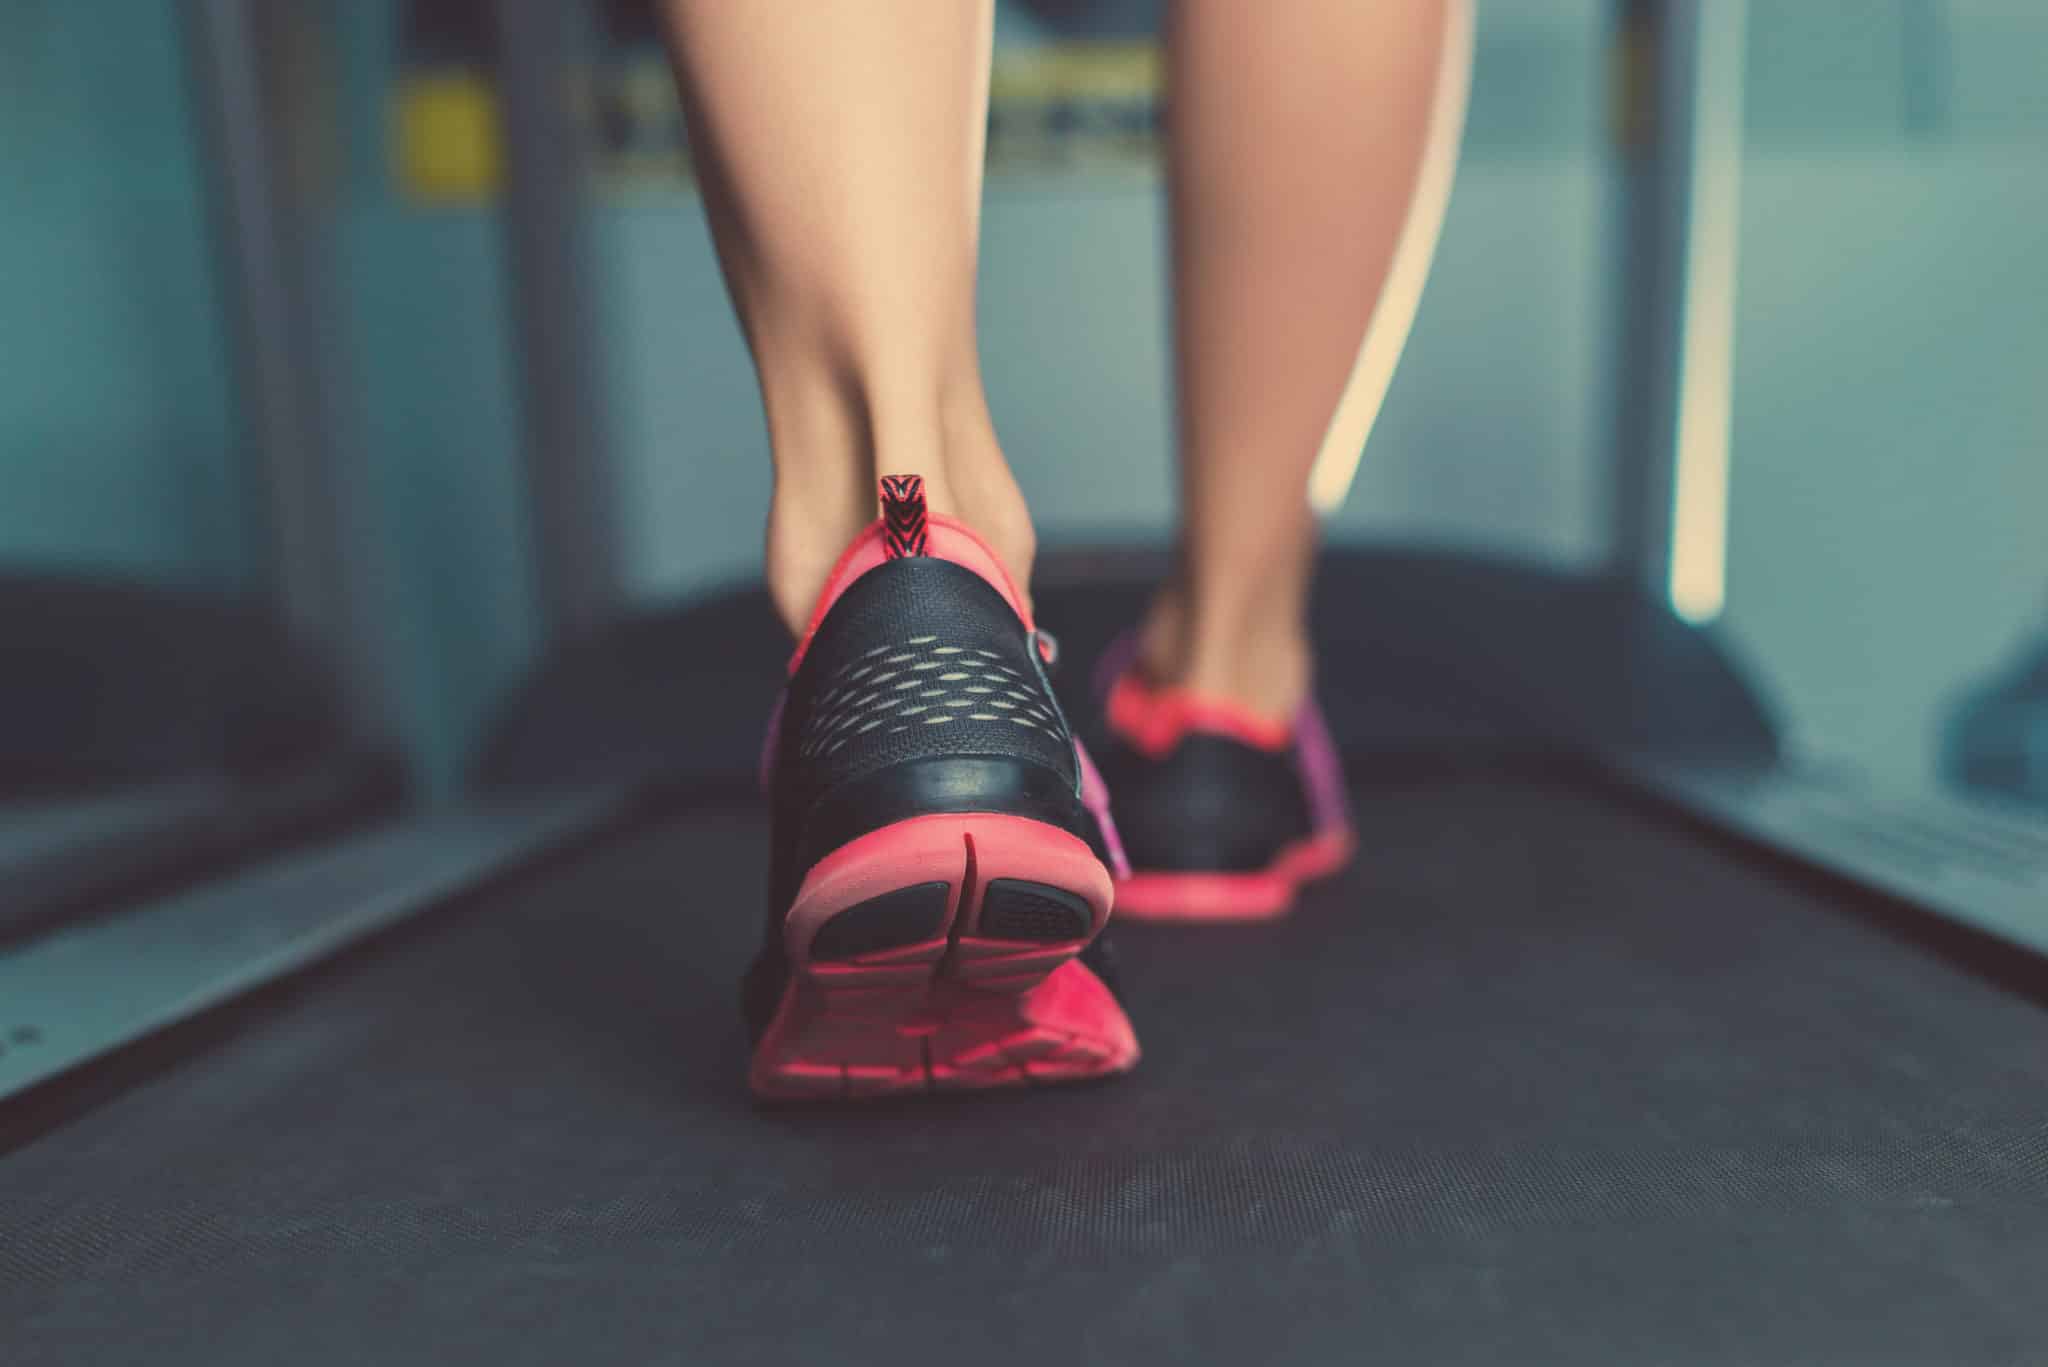 your treadmill workout can help improve your overall strength and endurance